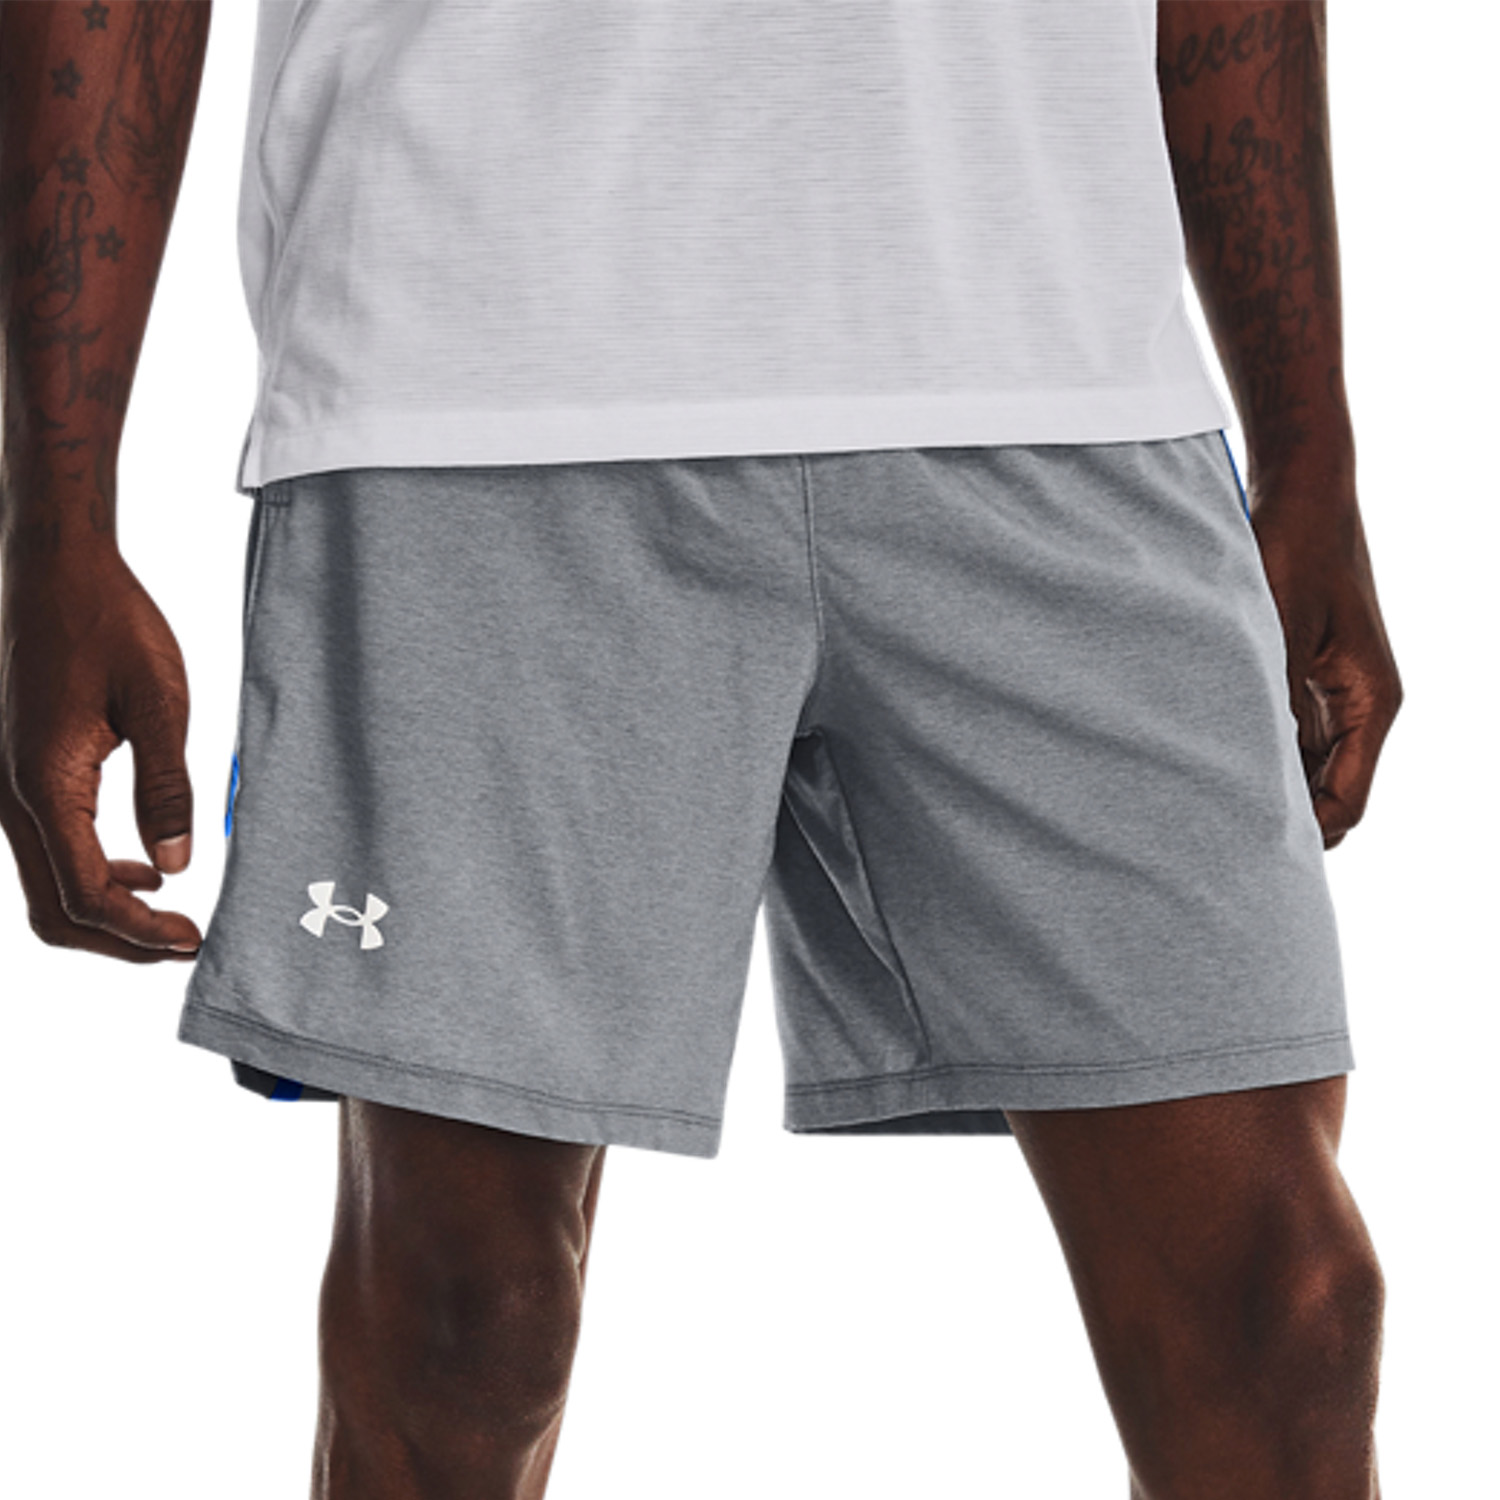 Under Armour Meridian Middy shorts in grey